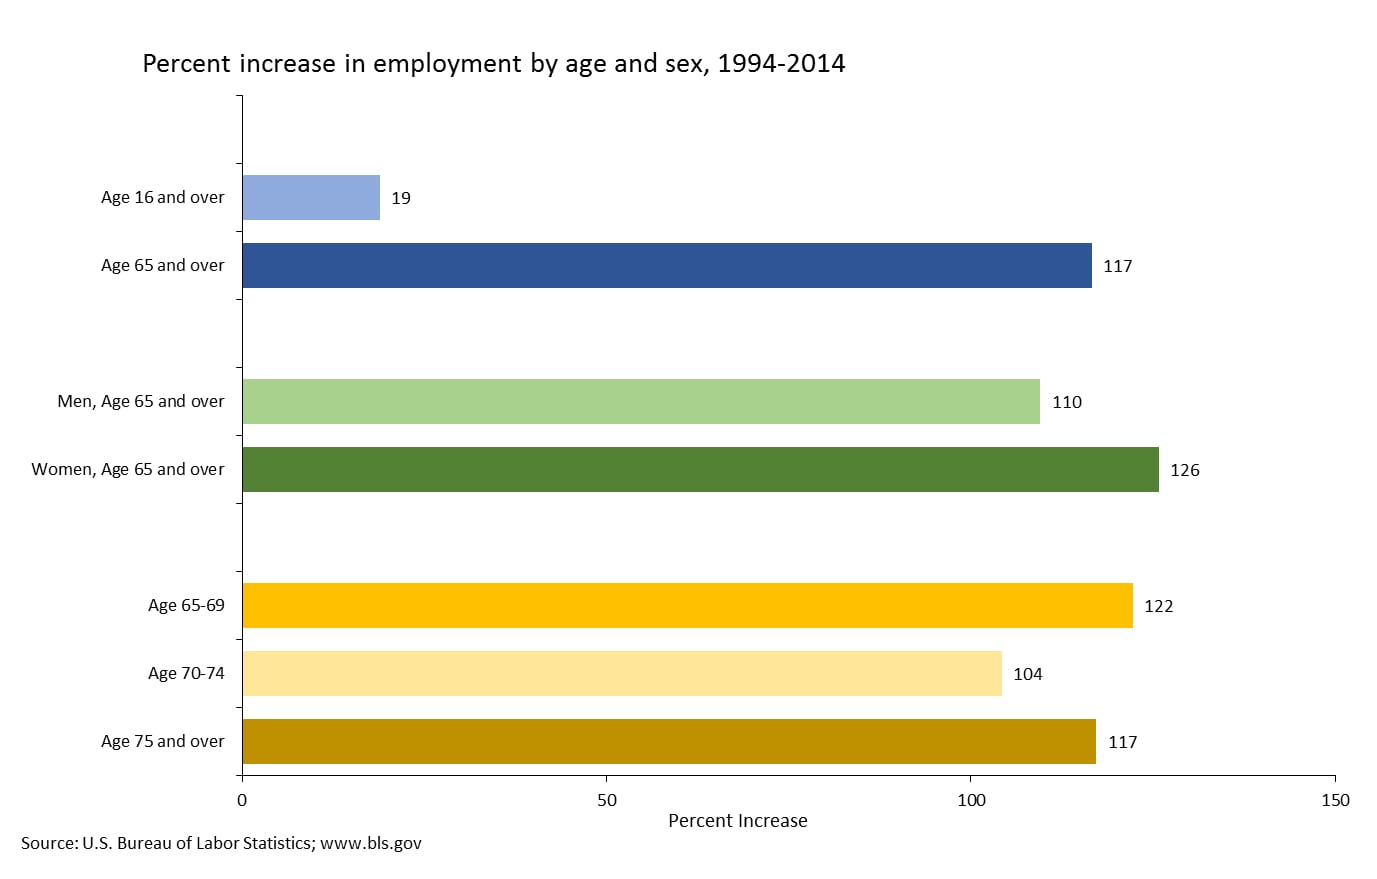 Chart showing the percent increase in employment by age and sex from 1994-2014.